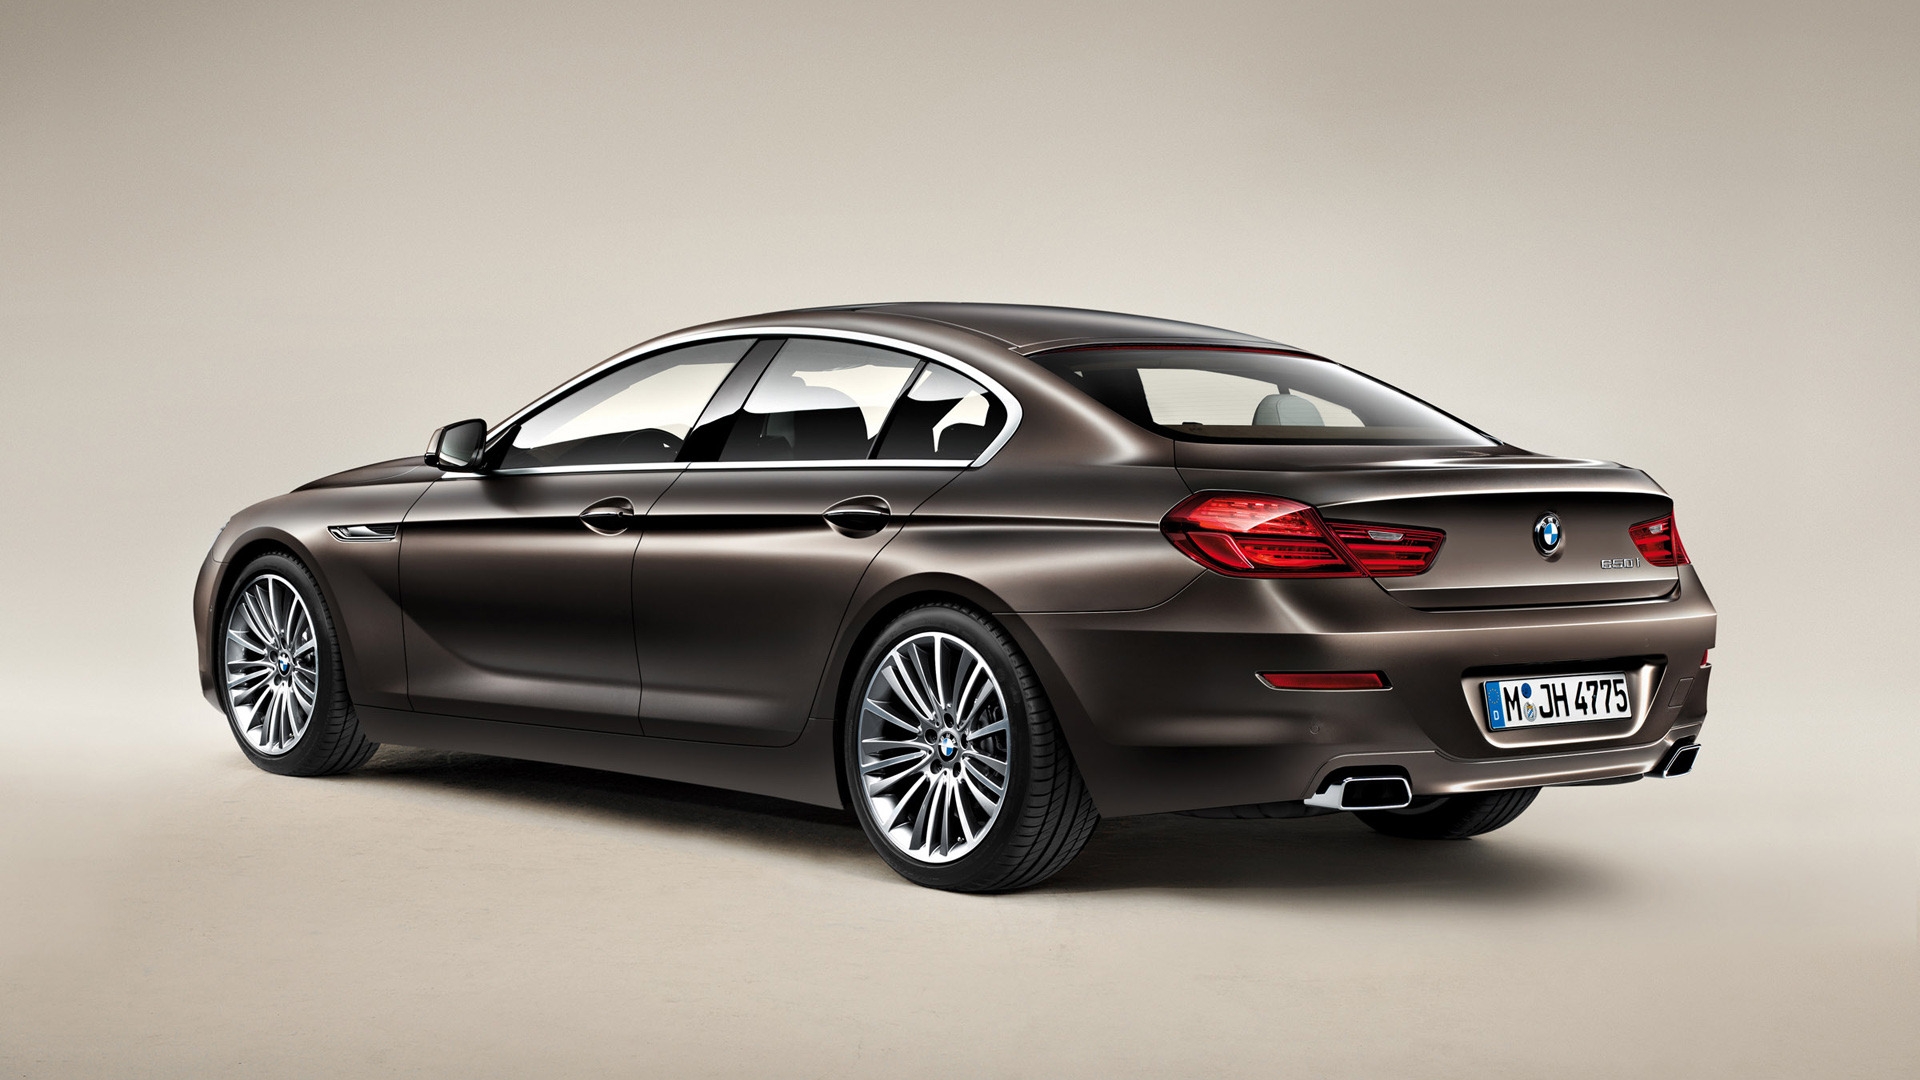 2013 BMW 6 Series Rear for 1920 x 1080 HDTV 1080p resolution